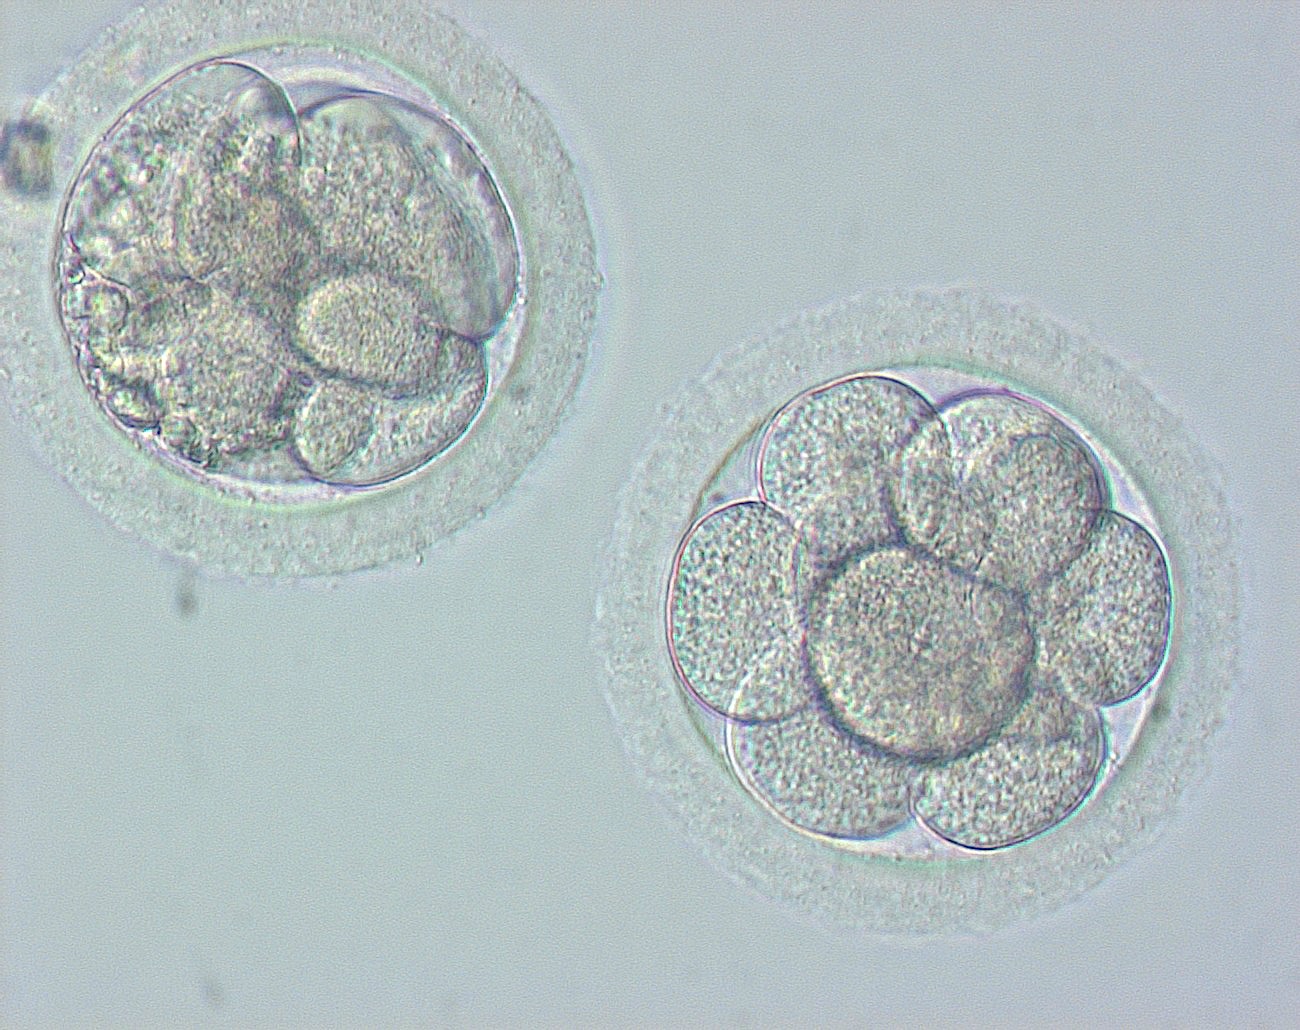 Rhesus monkey embryos resulting from intracytoplasmic sperm injection